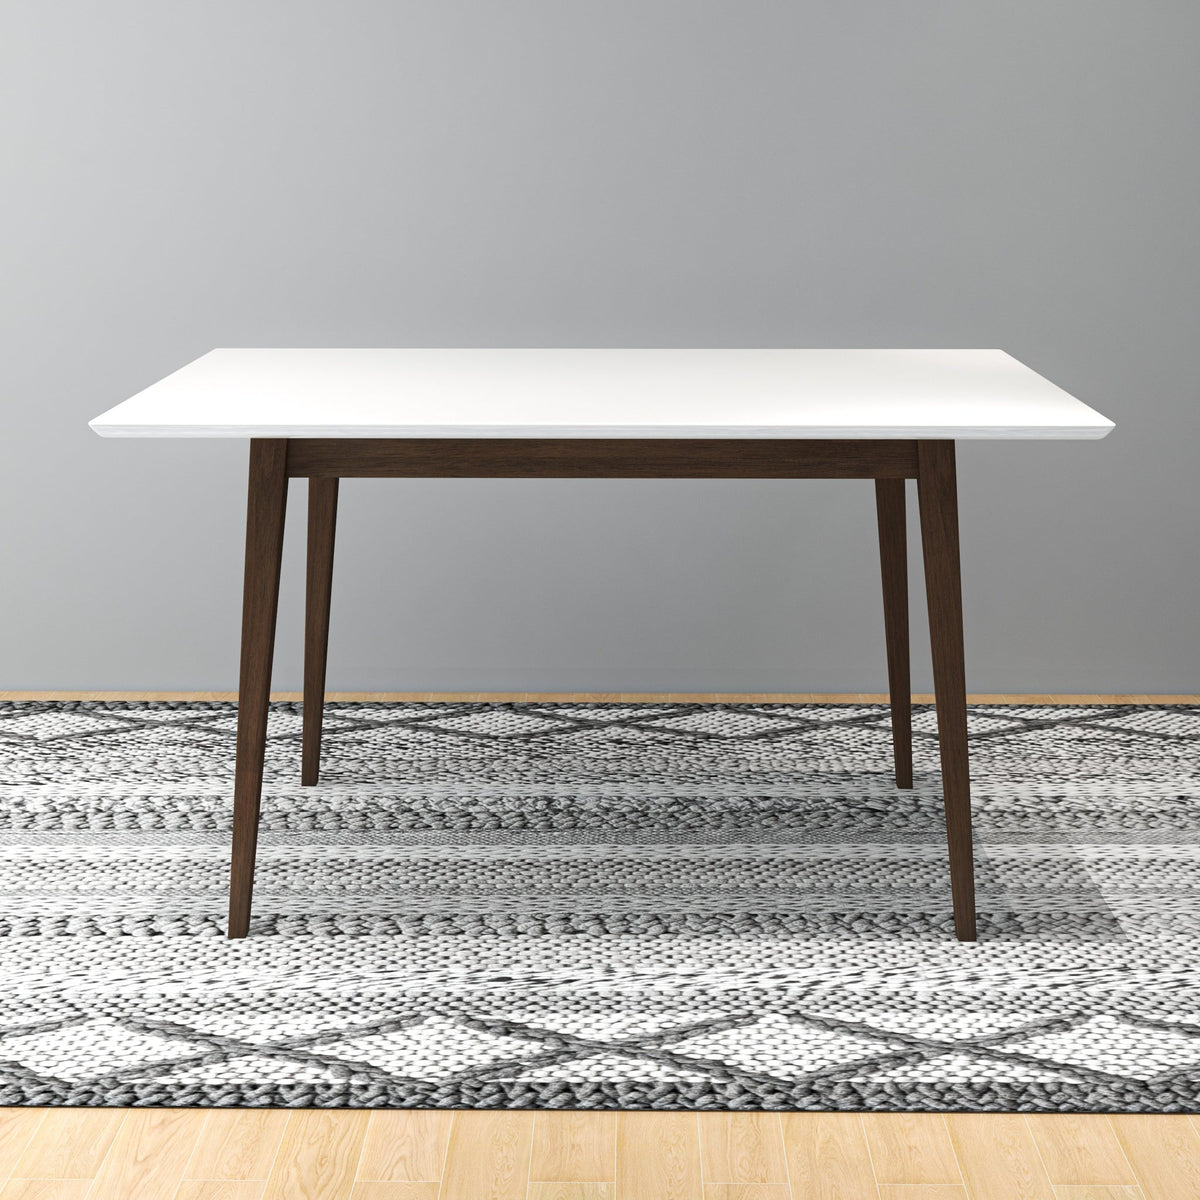 Adira White Top Small Dining Table 47" - MidinMod Houston Tx Mid Century Furniture Store - Dining Tables 4